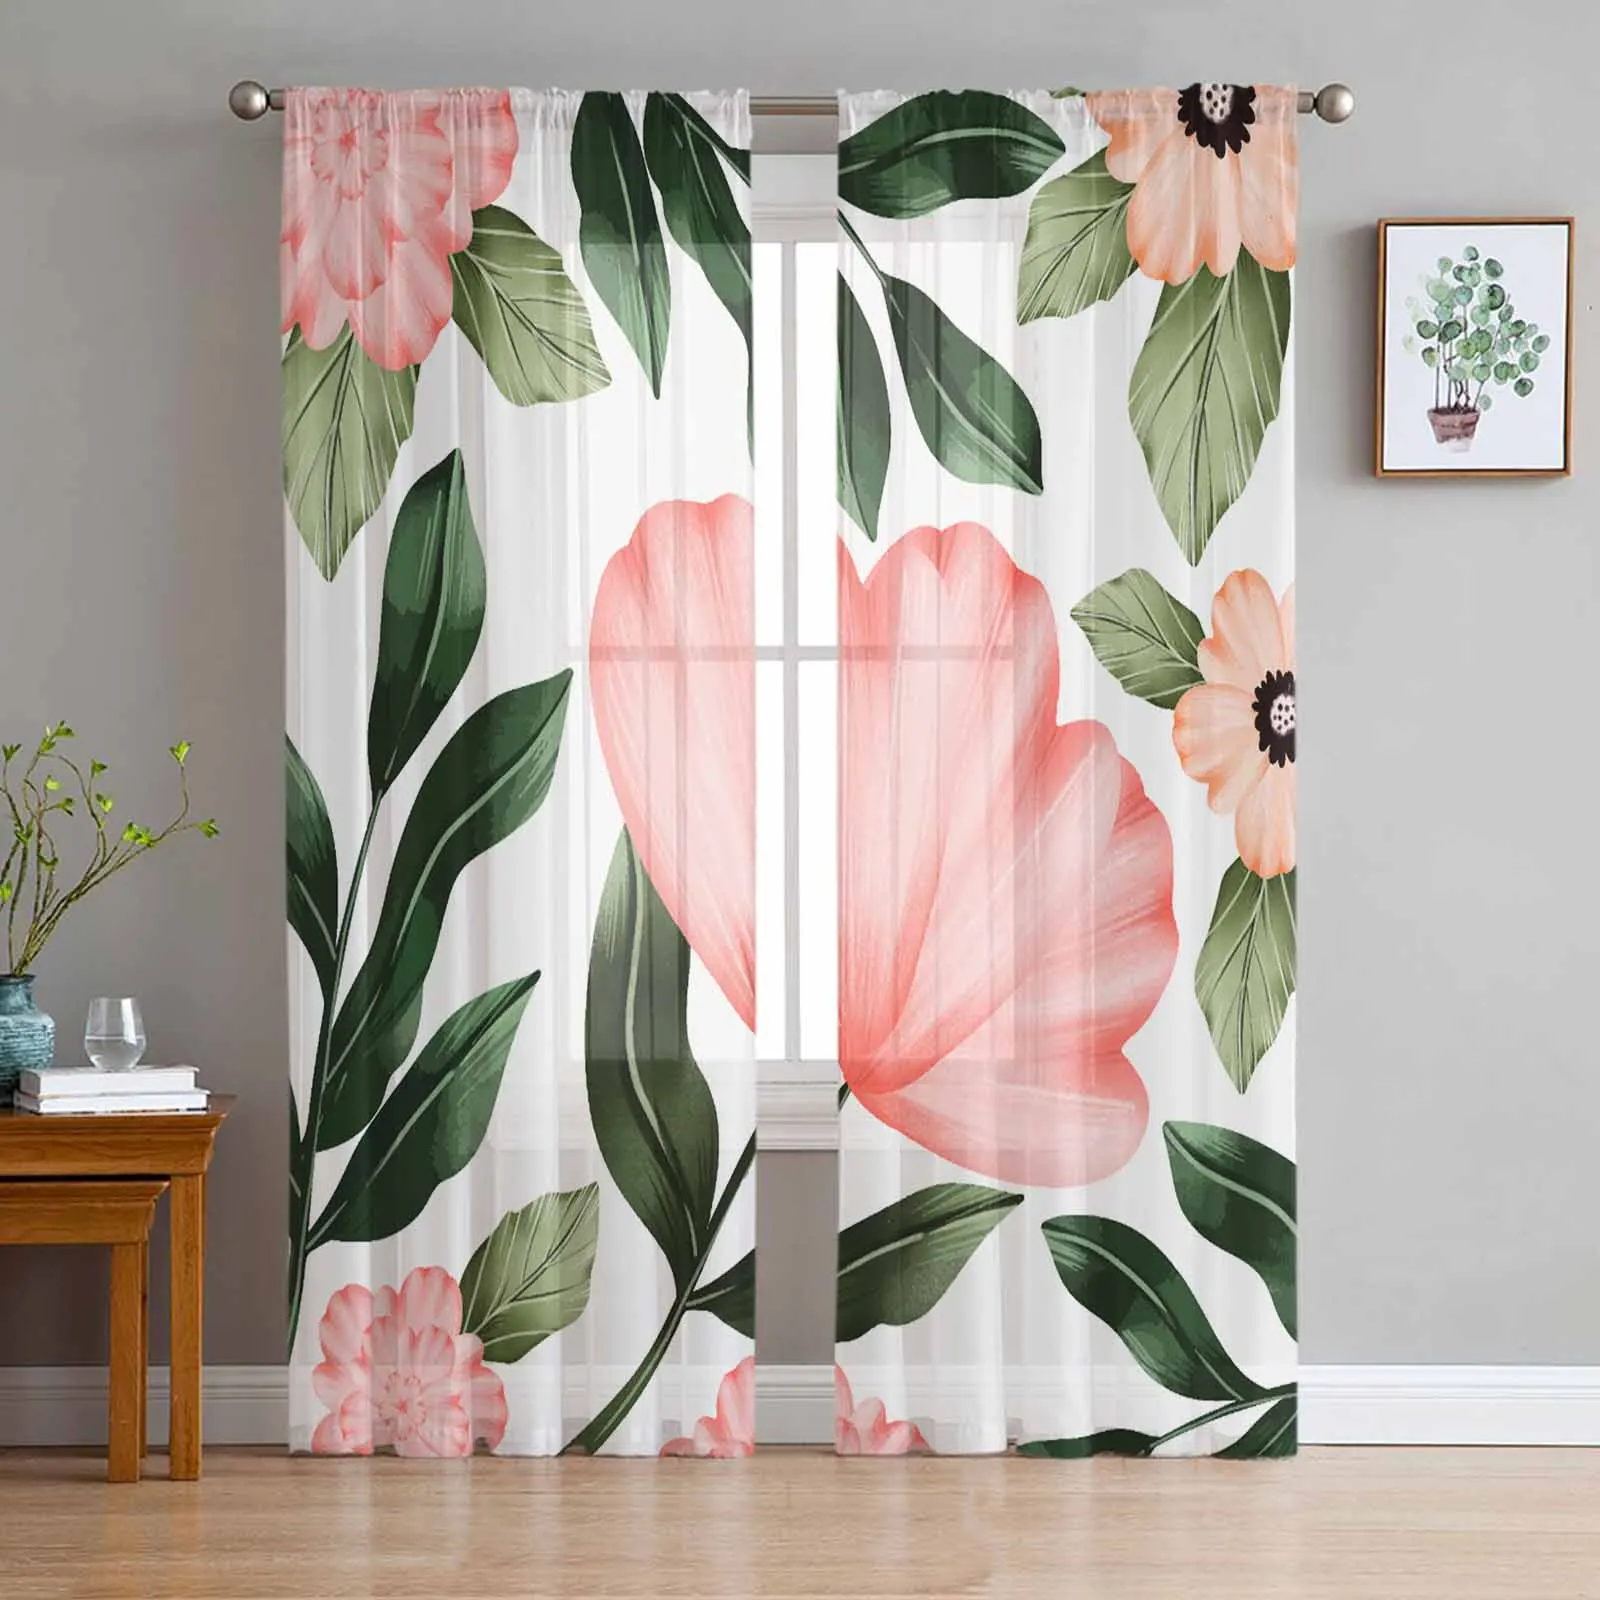 

Rural Plants Flowers And Grass Tulle Voile Curtains for Bedroom Living Room Window Curtain Sheer Curtains Organza Drapes